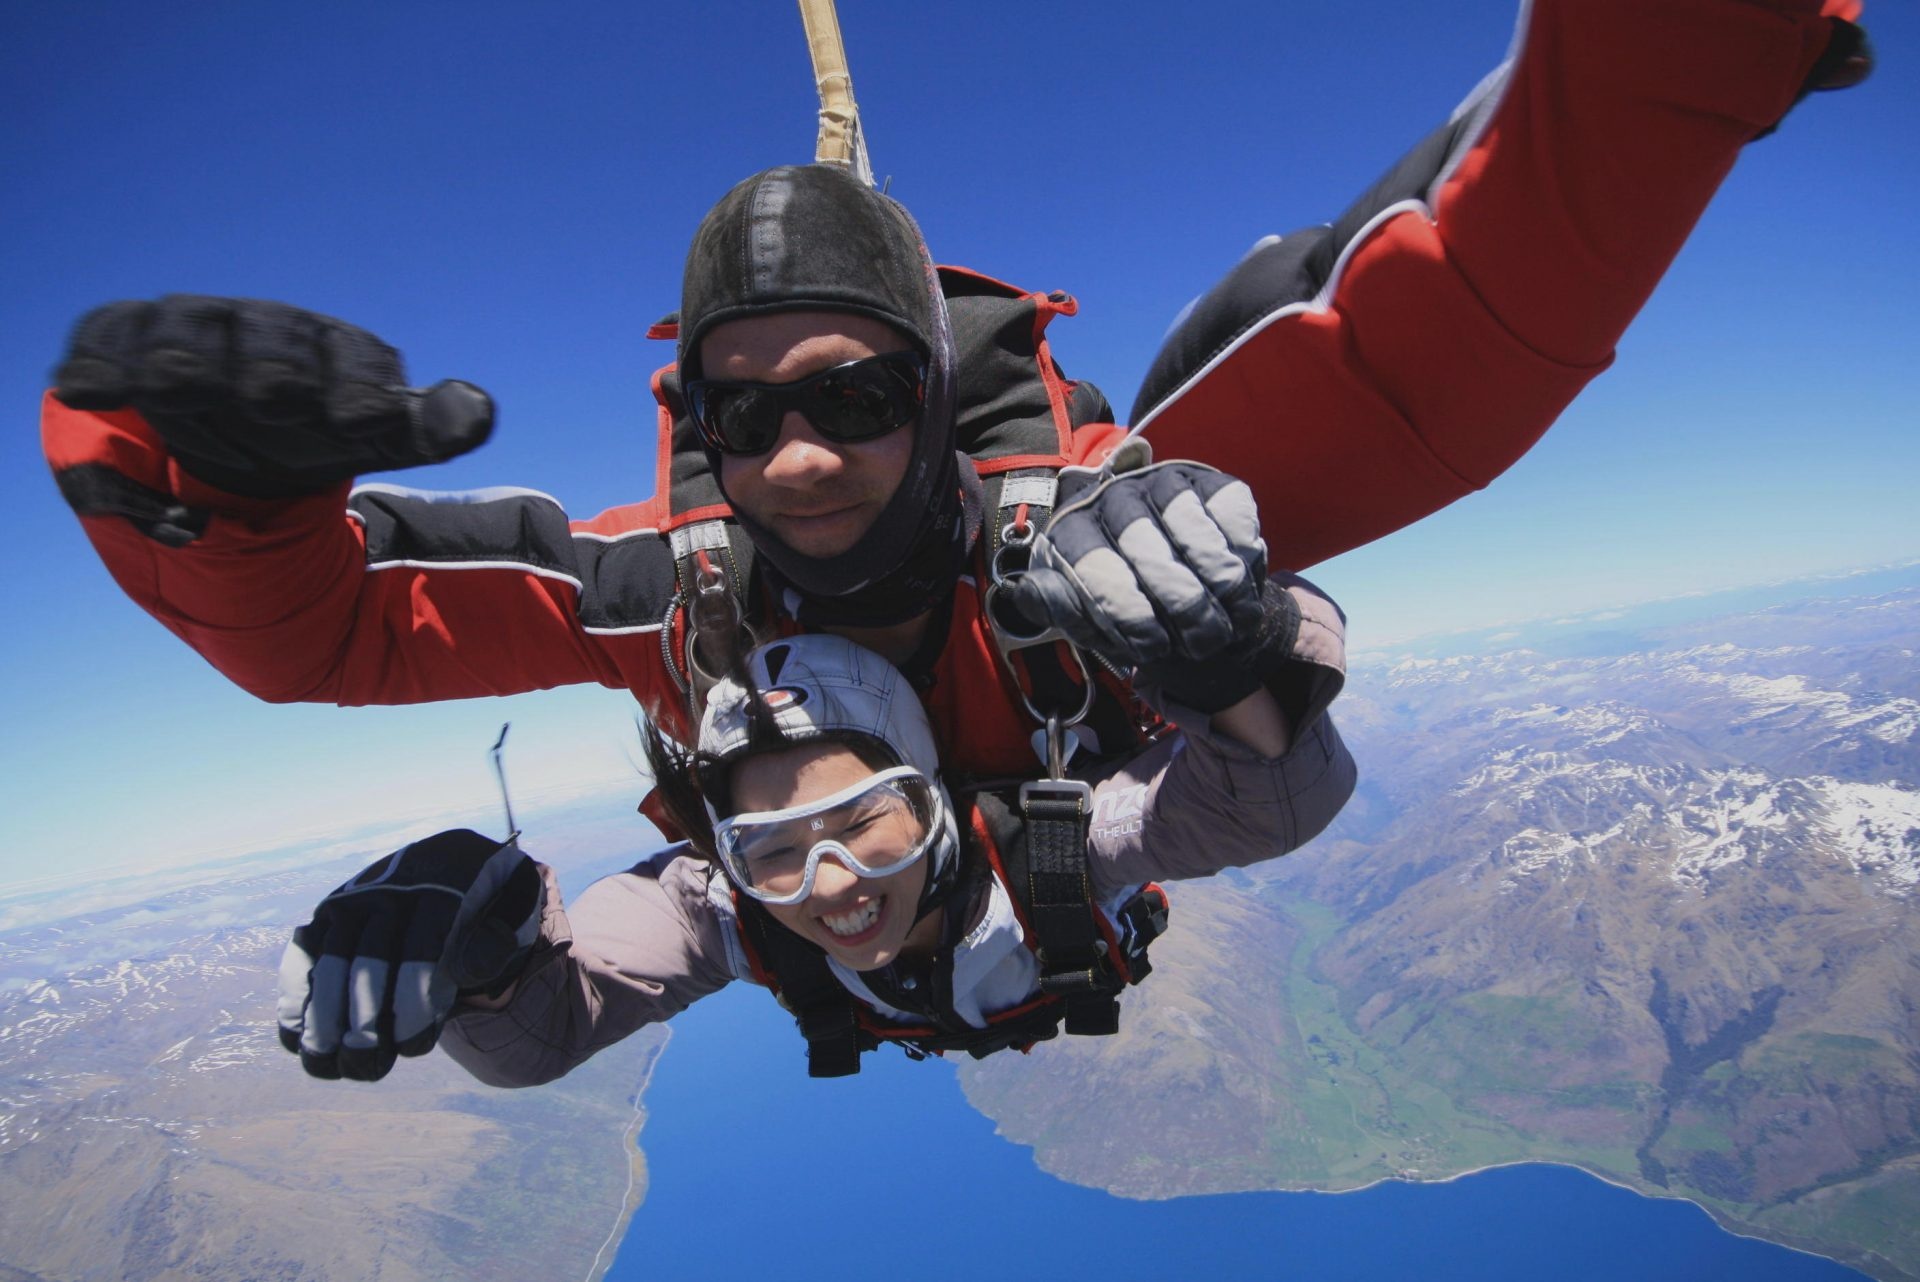 Chinese demand for adventure travel is causing a shortage of skydiving instructors in New Zealand. (April Ngern/Flickr)